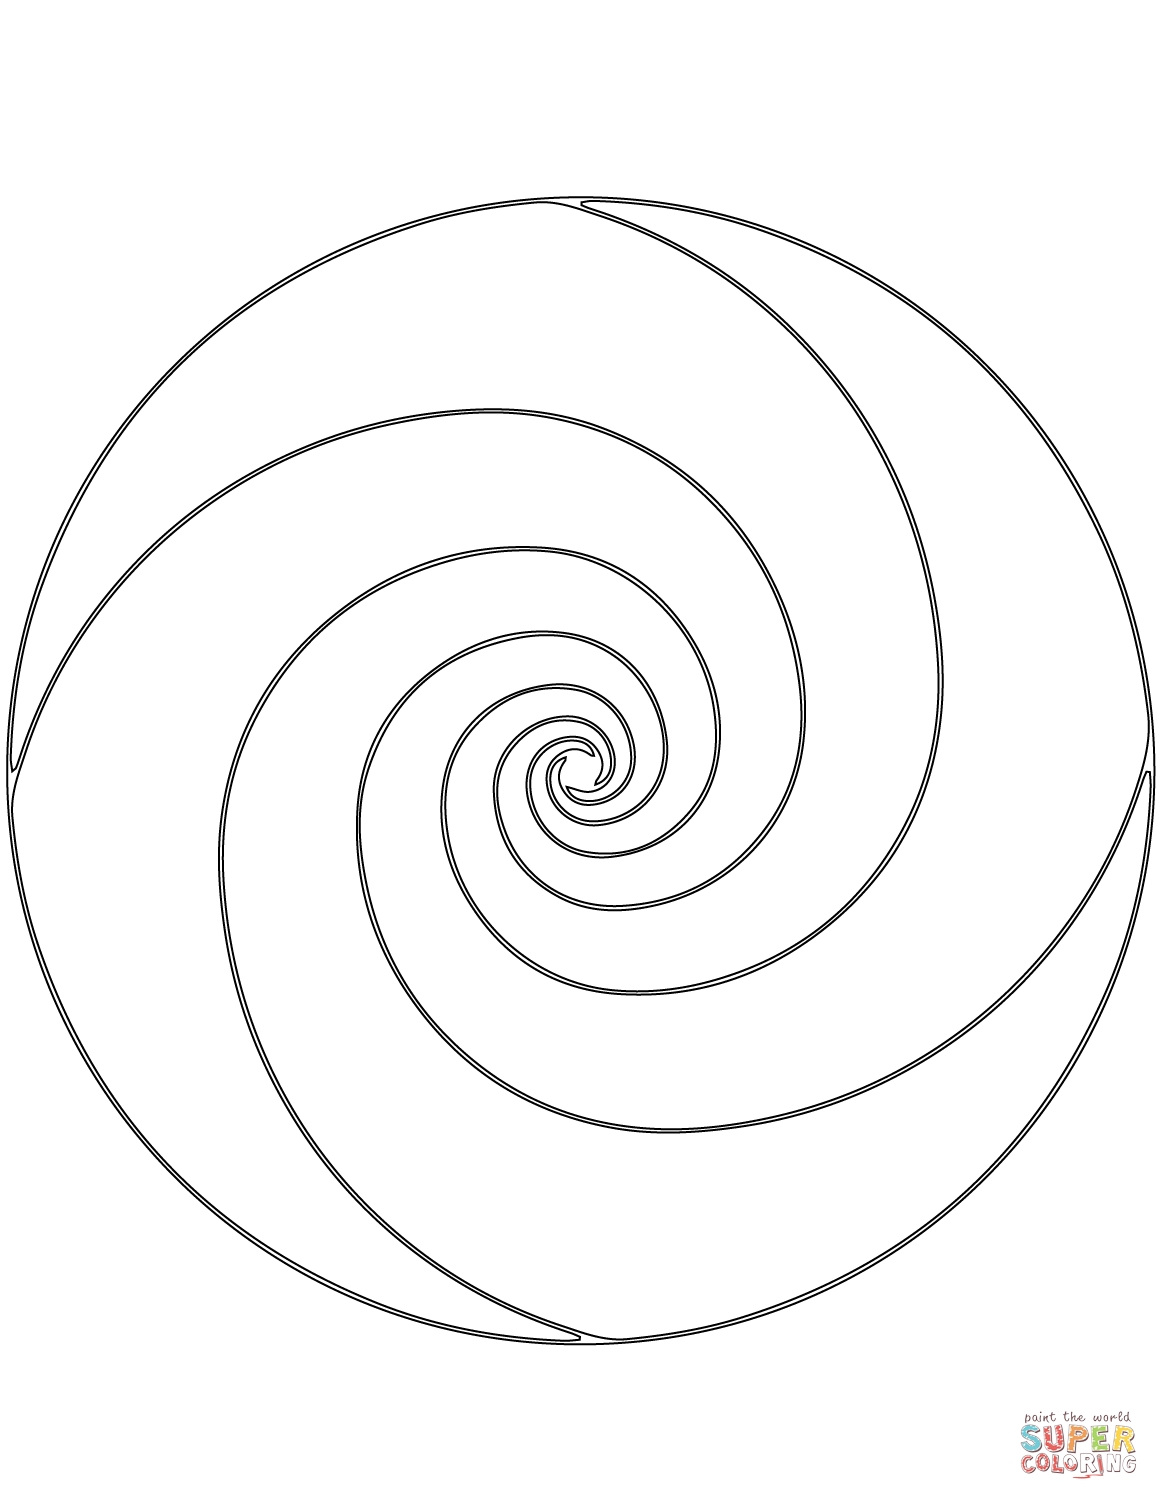 Spiral Coloring Pages at GetDrawings | Free download